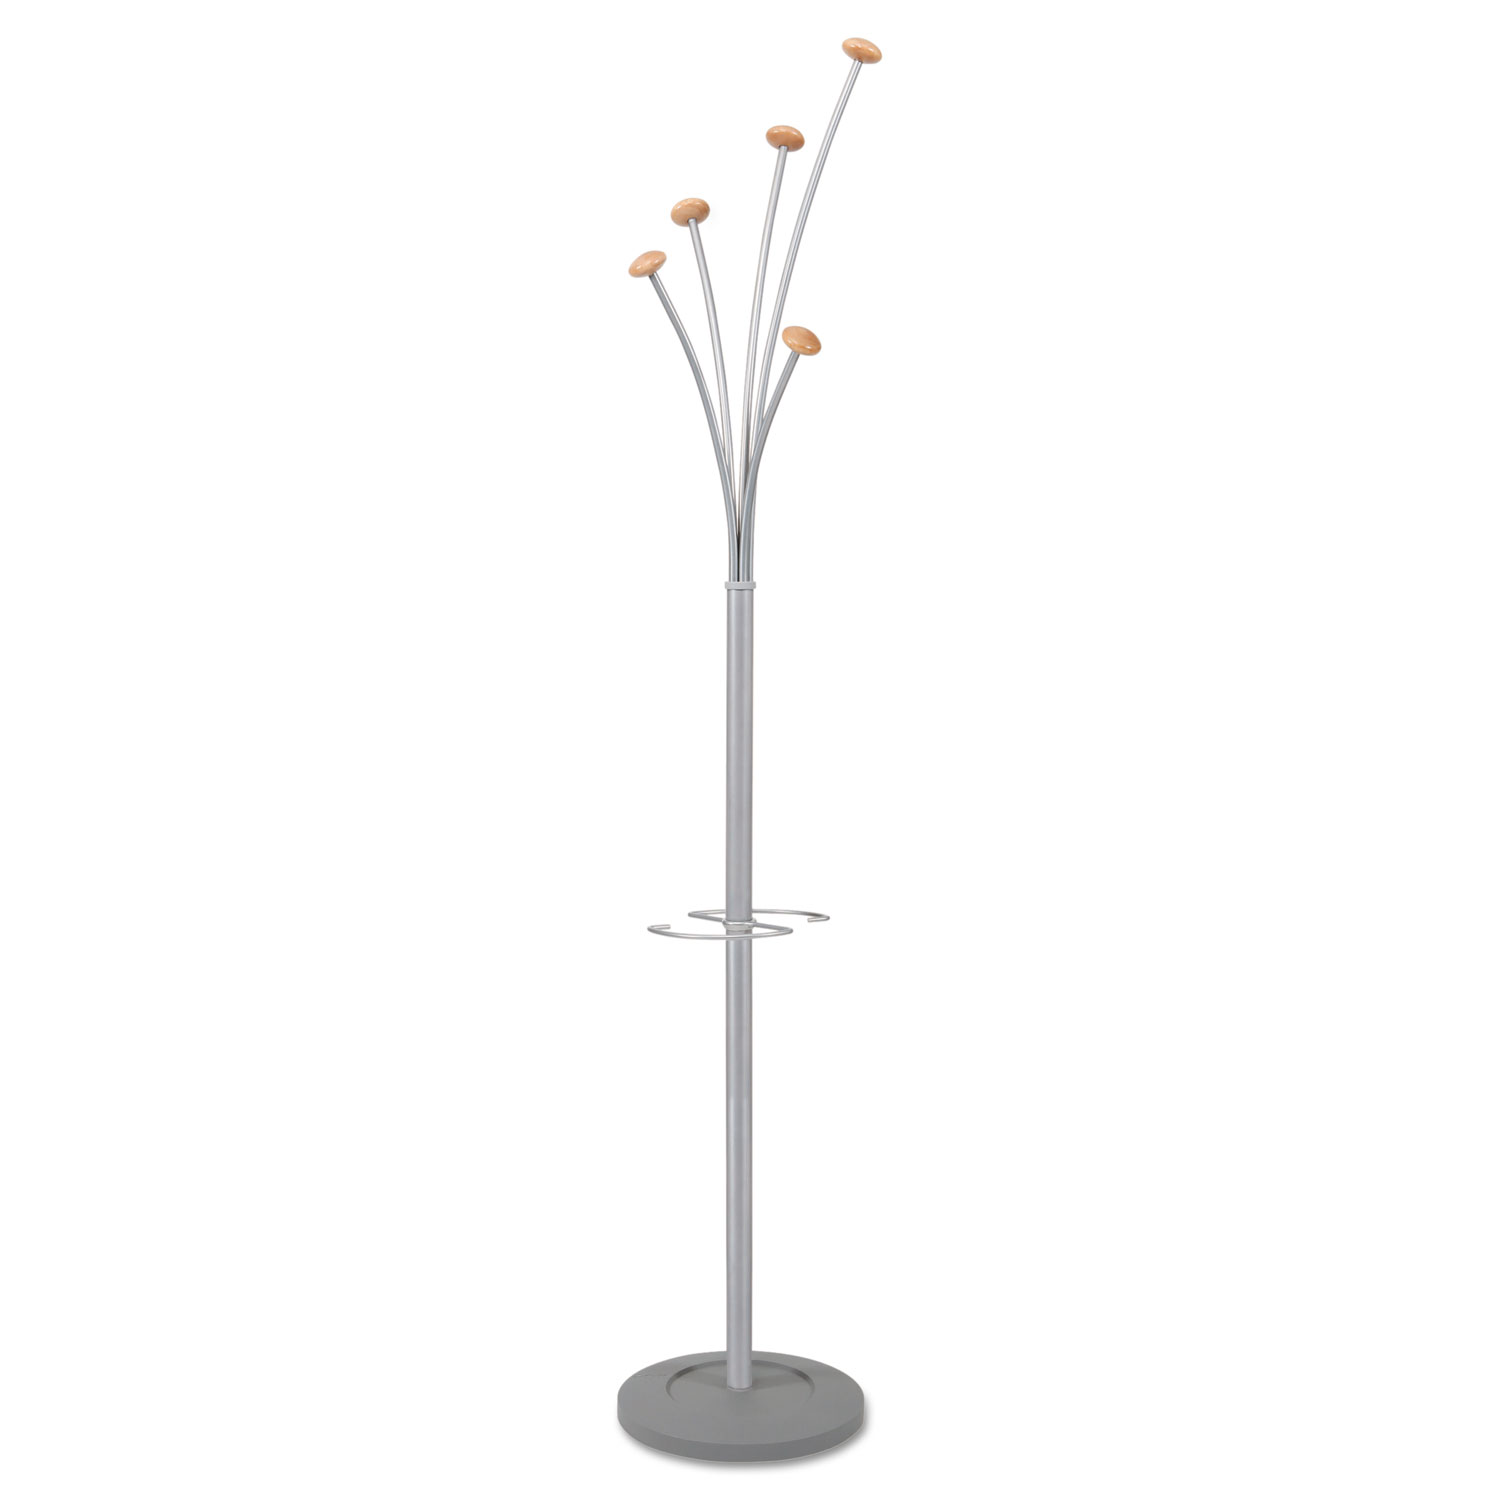  Alba PMFEST Festival Coat Stand with Umbrella Holder, Five Knobs, 14w x 14d x 73.67h, Silver Gray (ABAPMFEST) 